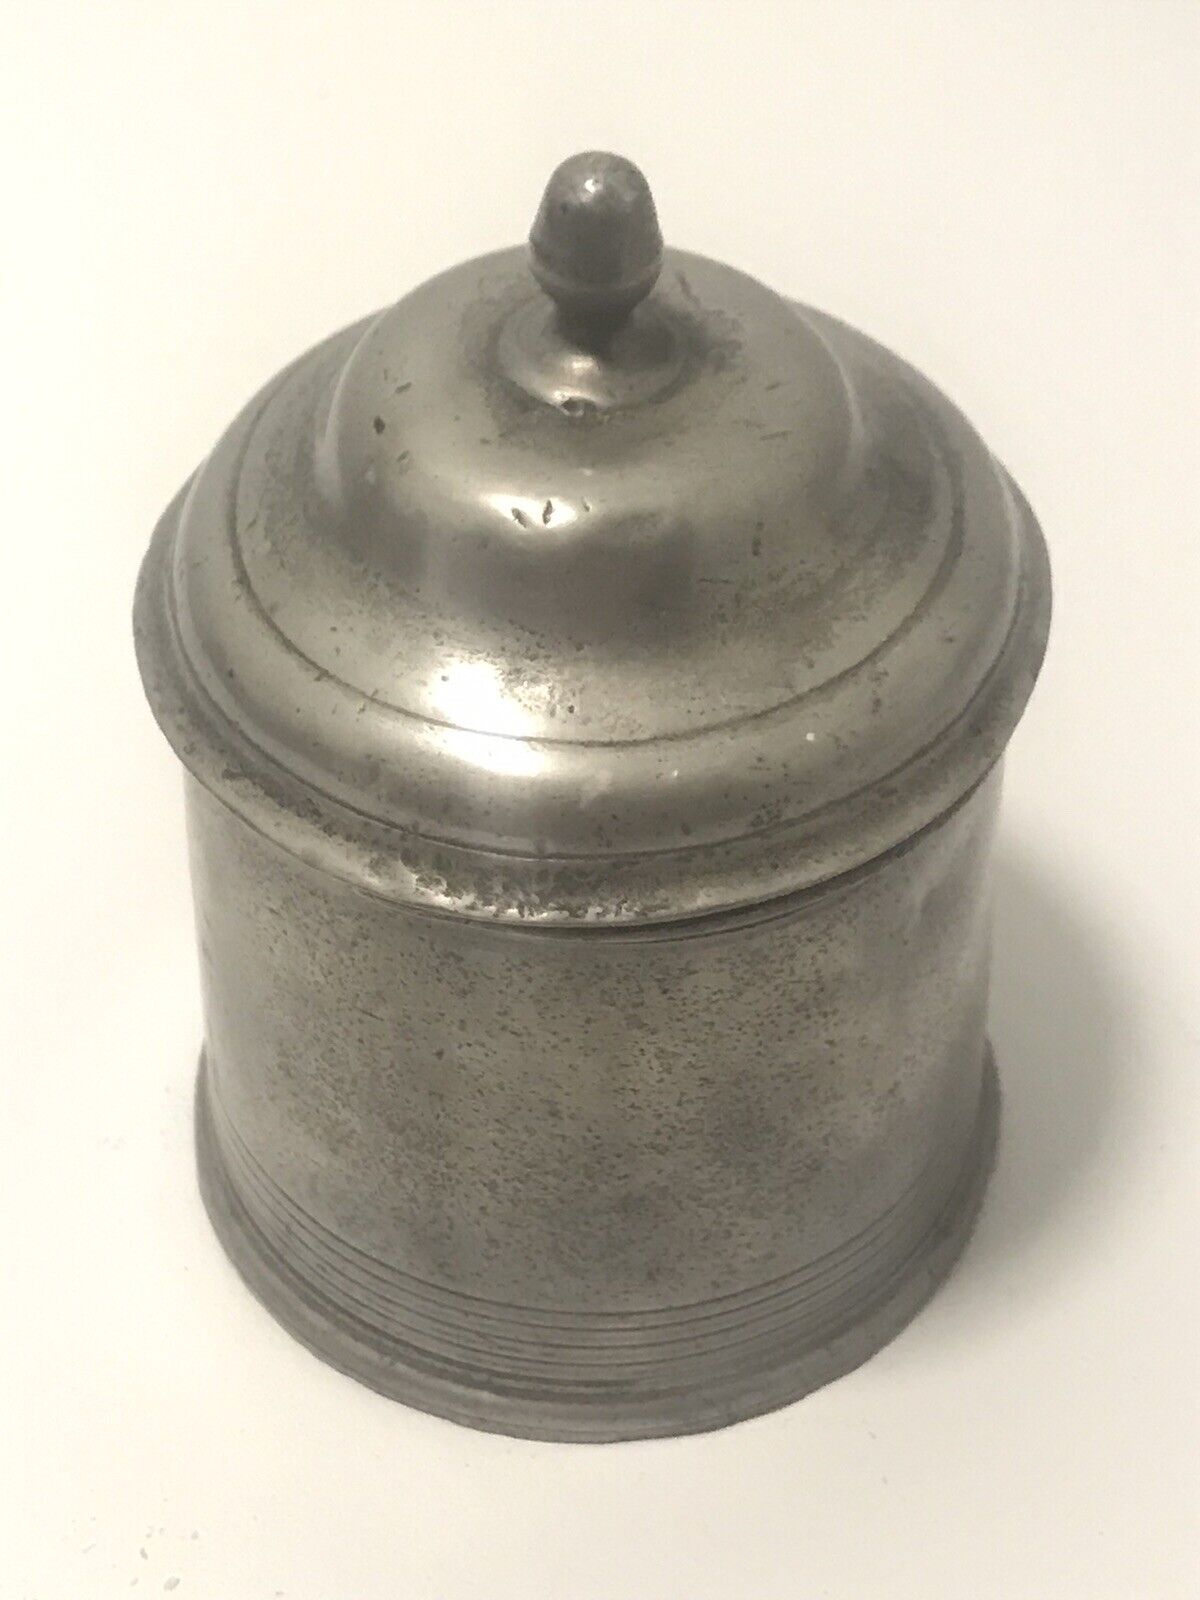 George The Third Pewter Tobacco Jar Humidor With Presser Antique C1800-1820